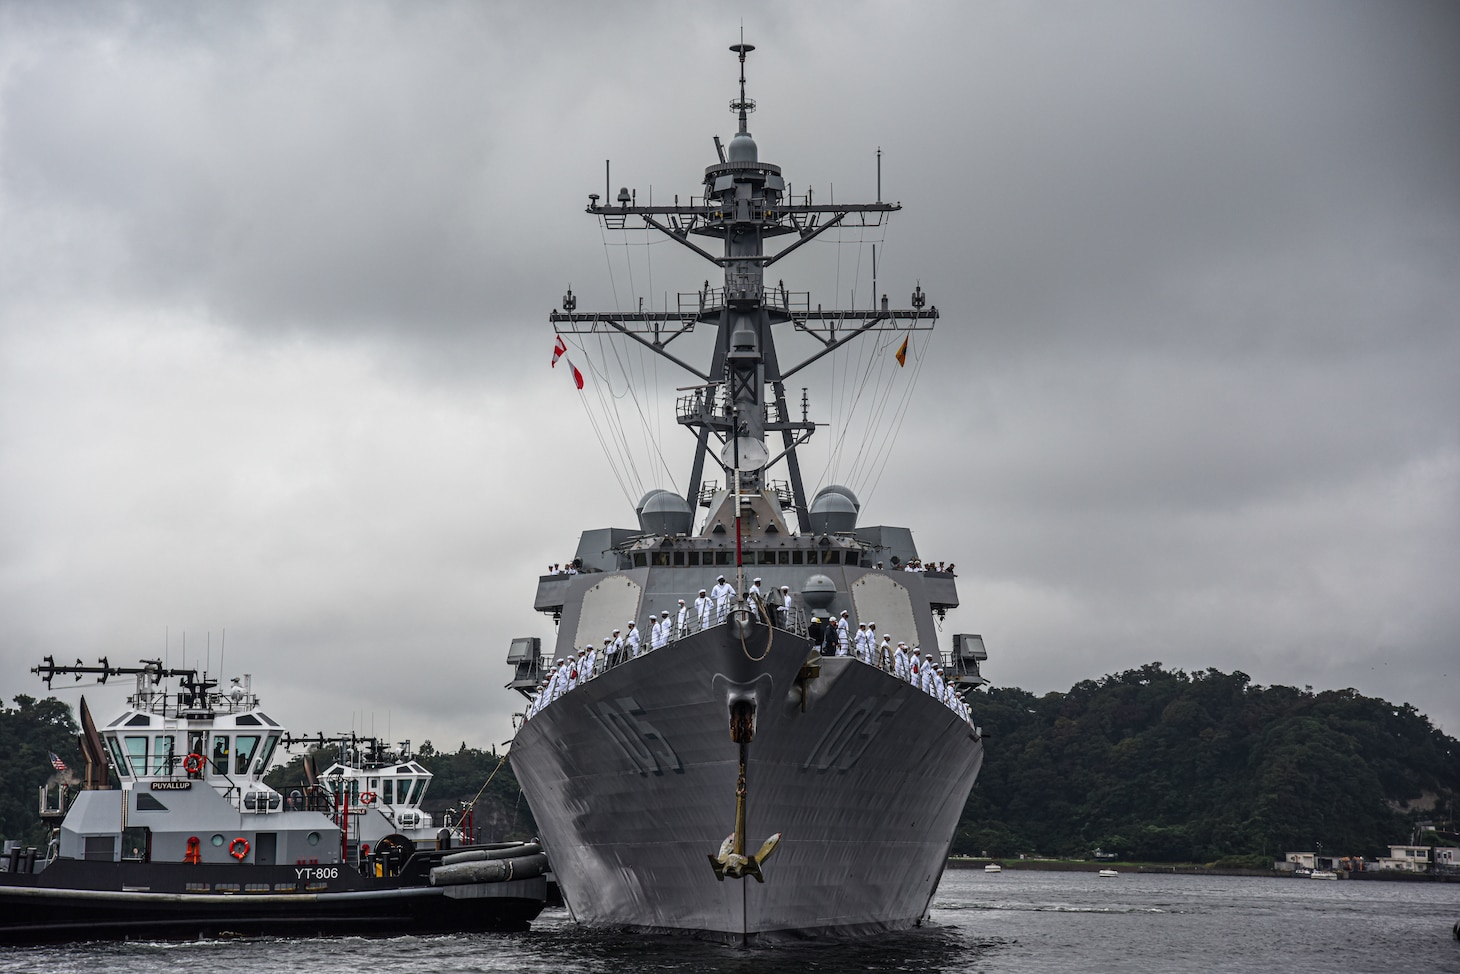 YOKOSUKA, Japan (Sept. 8, 2021) The Arleigh Burke-class guided-missile destroyer USS Dewey (DDG 105) arrives at Commander, Fleet Activities Yokosuka as one of the newest additions to Commander, Task Force (CTF) 71/Destroyer Squadron (DESRON) 15. Dewey is assigned to CTF 71/DESRON 15, the Navy’s largest forward-deployed DESRON and the U.S. 7th Fleet’s principle surface force. (U.S. Navy photo by Mass Communication Specialist 3rd Class Zenaida Roth)